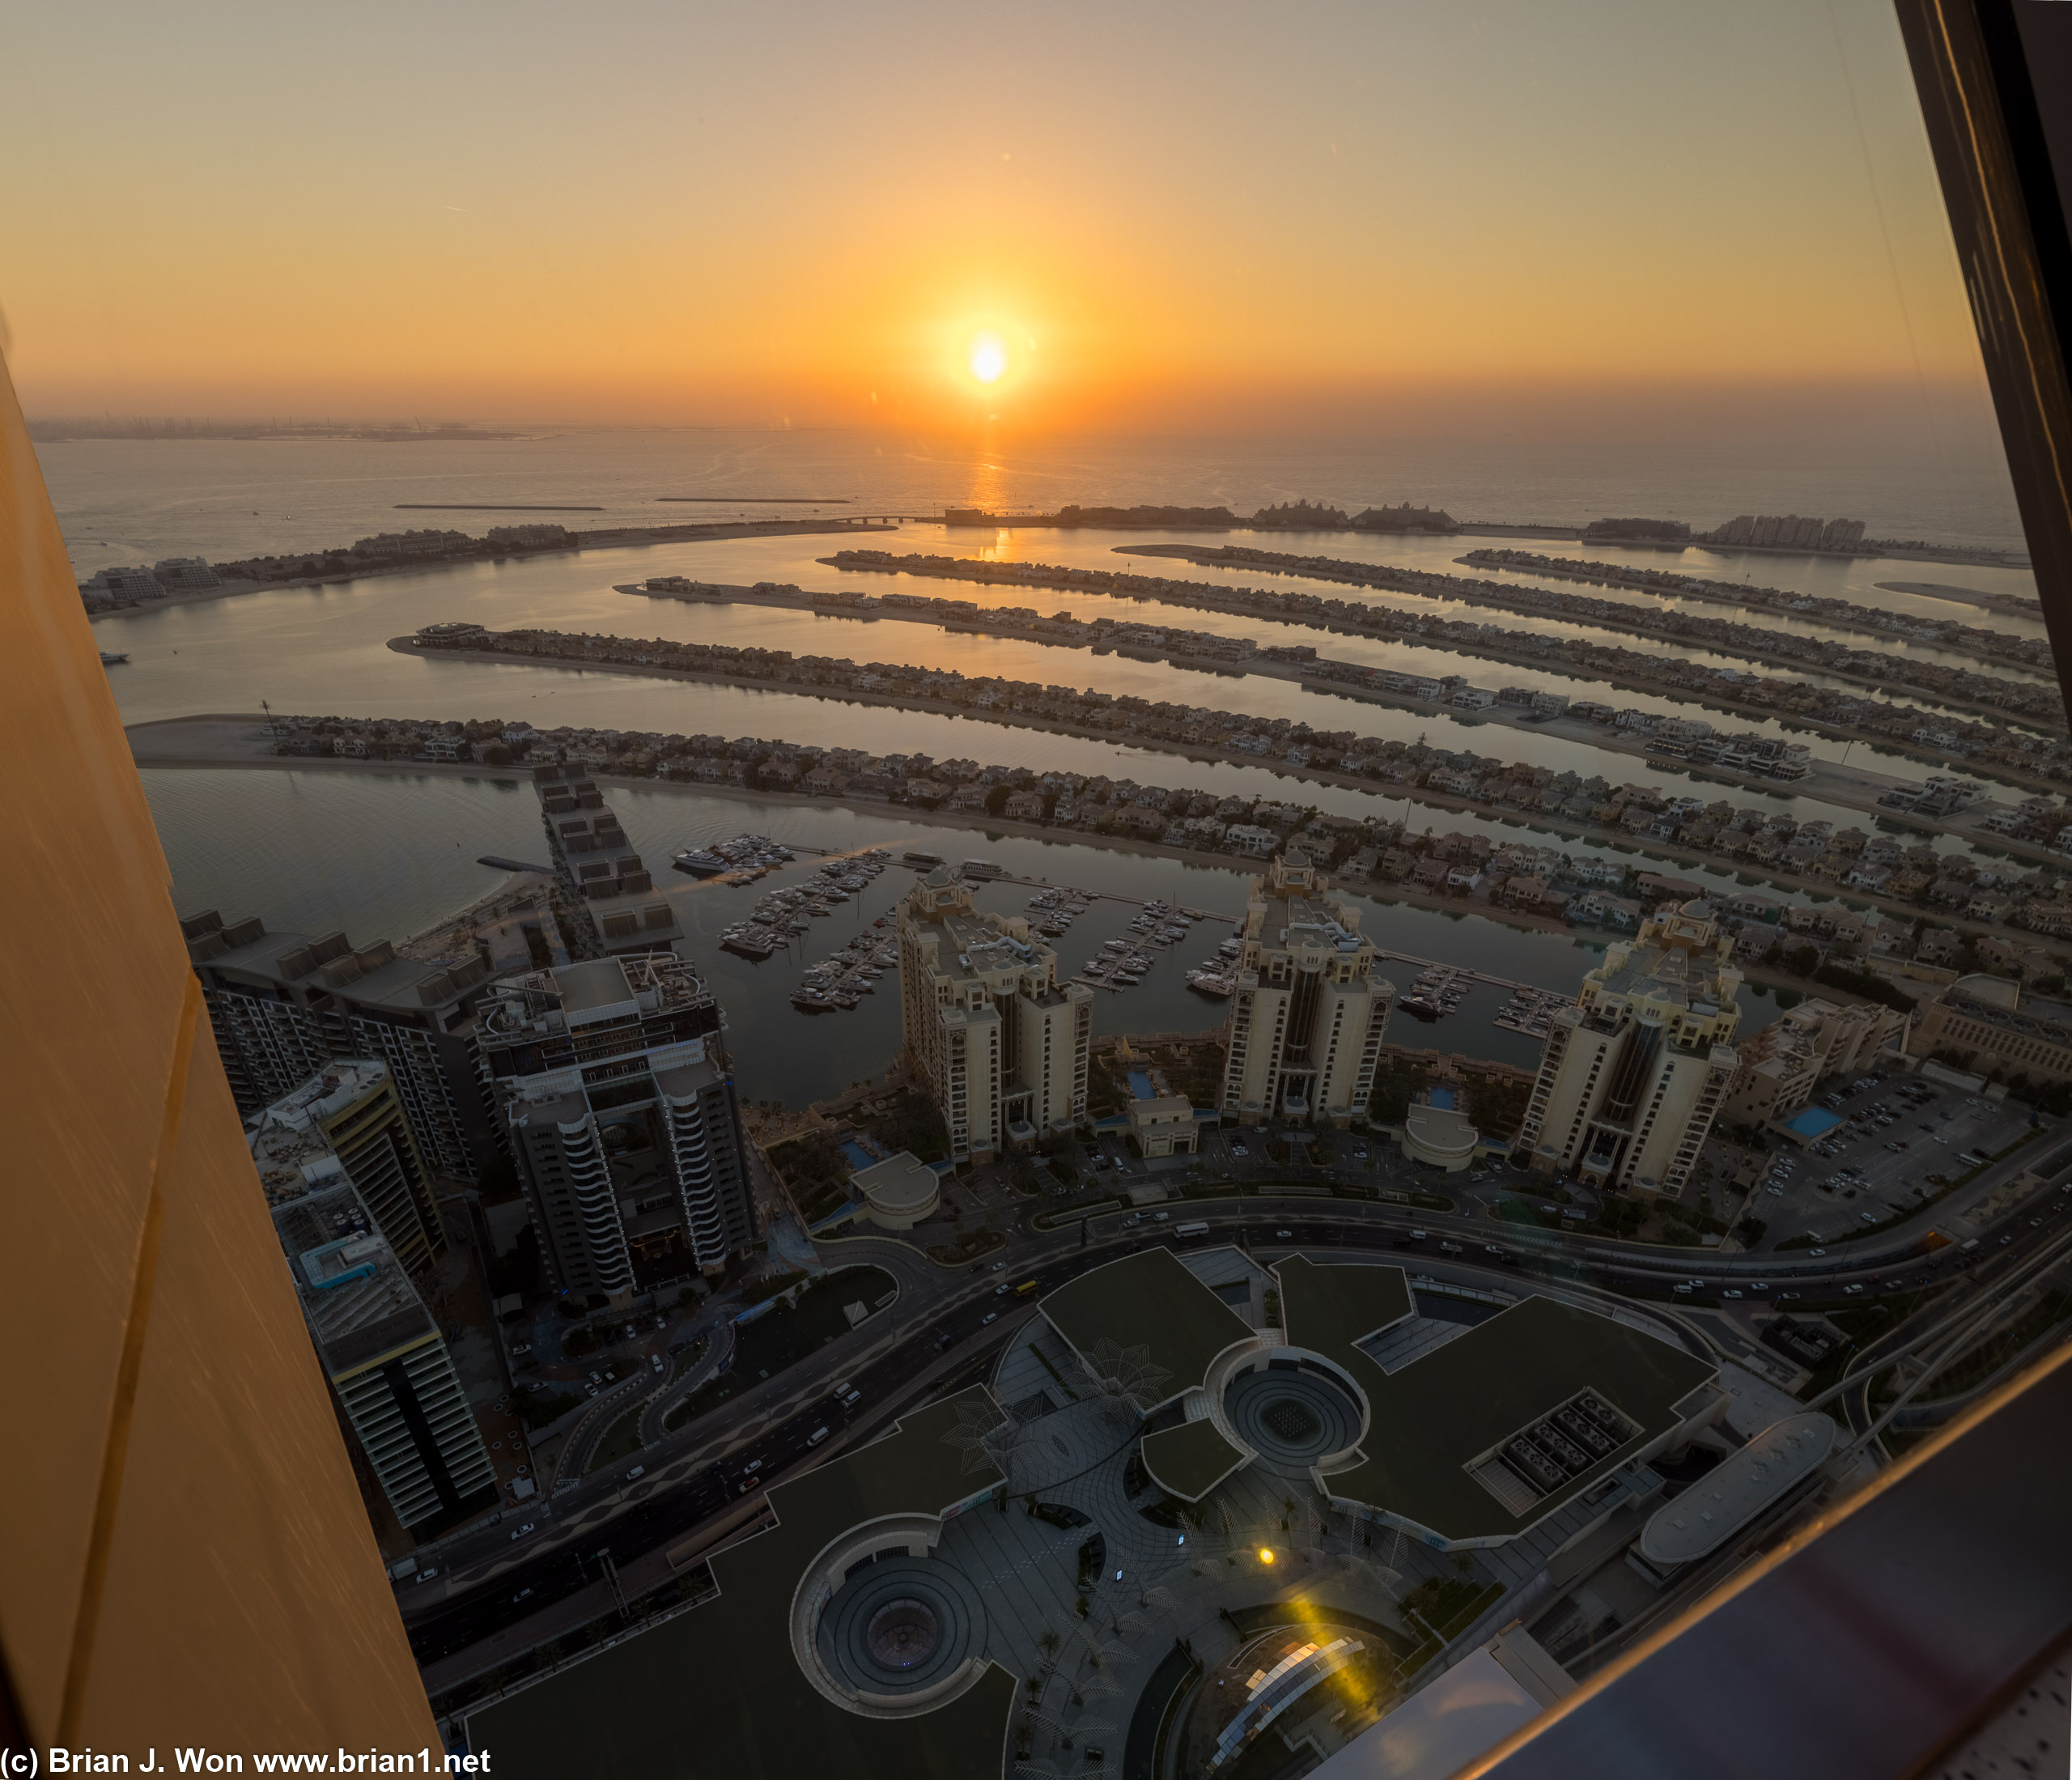 Next up, sunset from The View at The Palm Jumeirah.